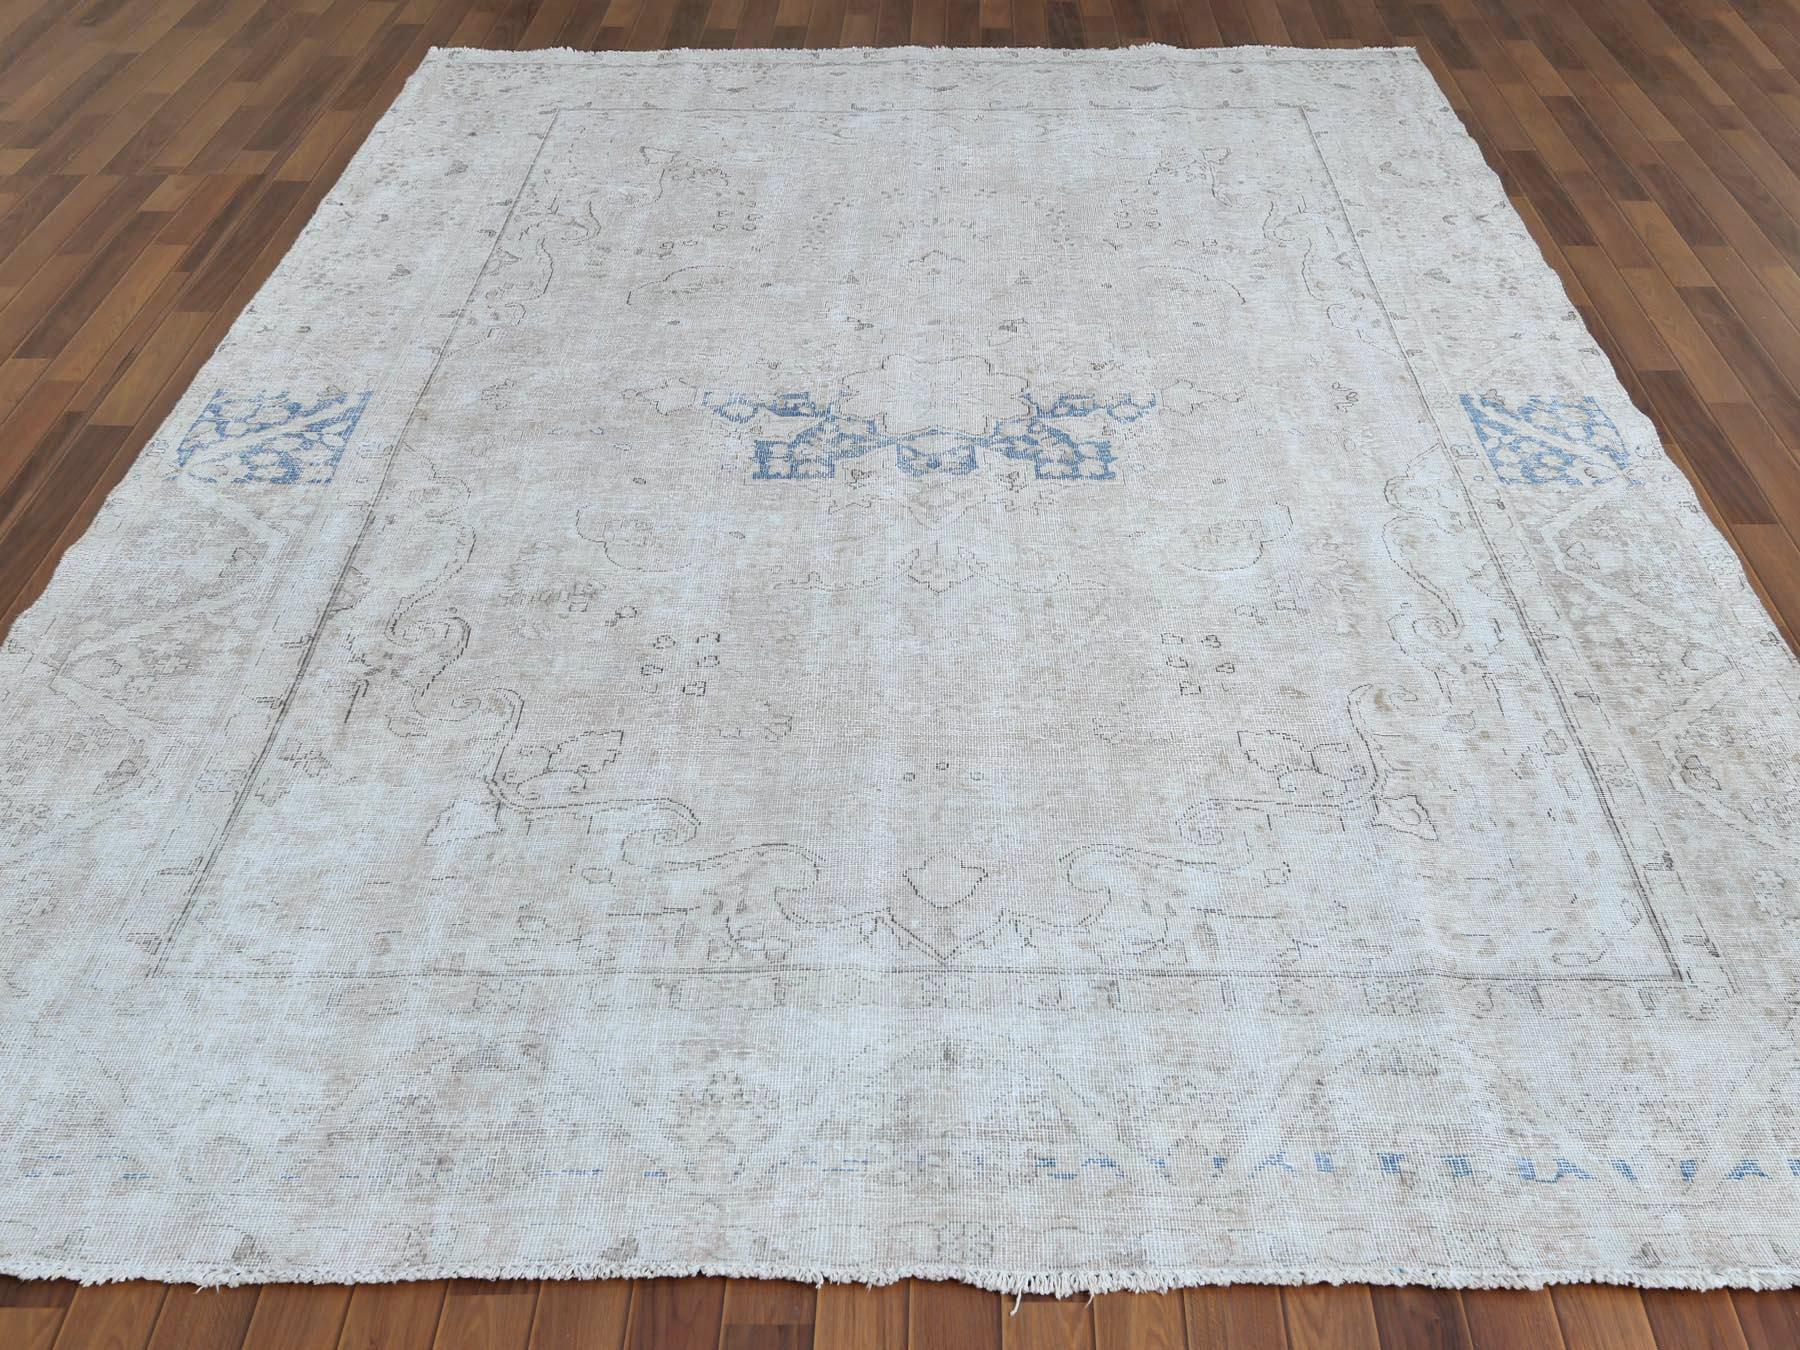 Medieval Old Taupe Persian Kerman Distressed Look Clean Velvety Wool Hand Knotted Rug